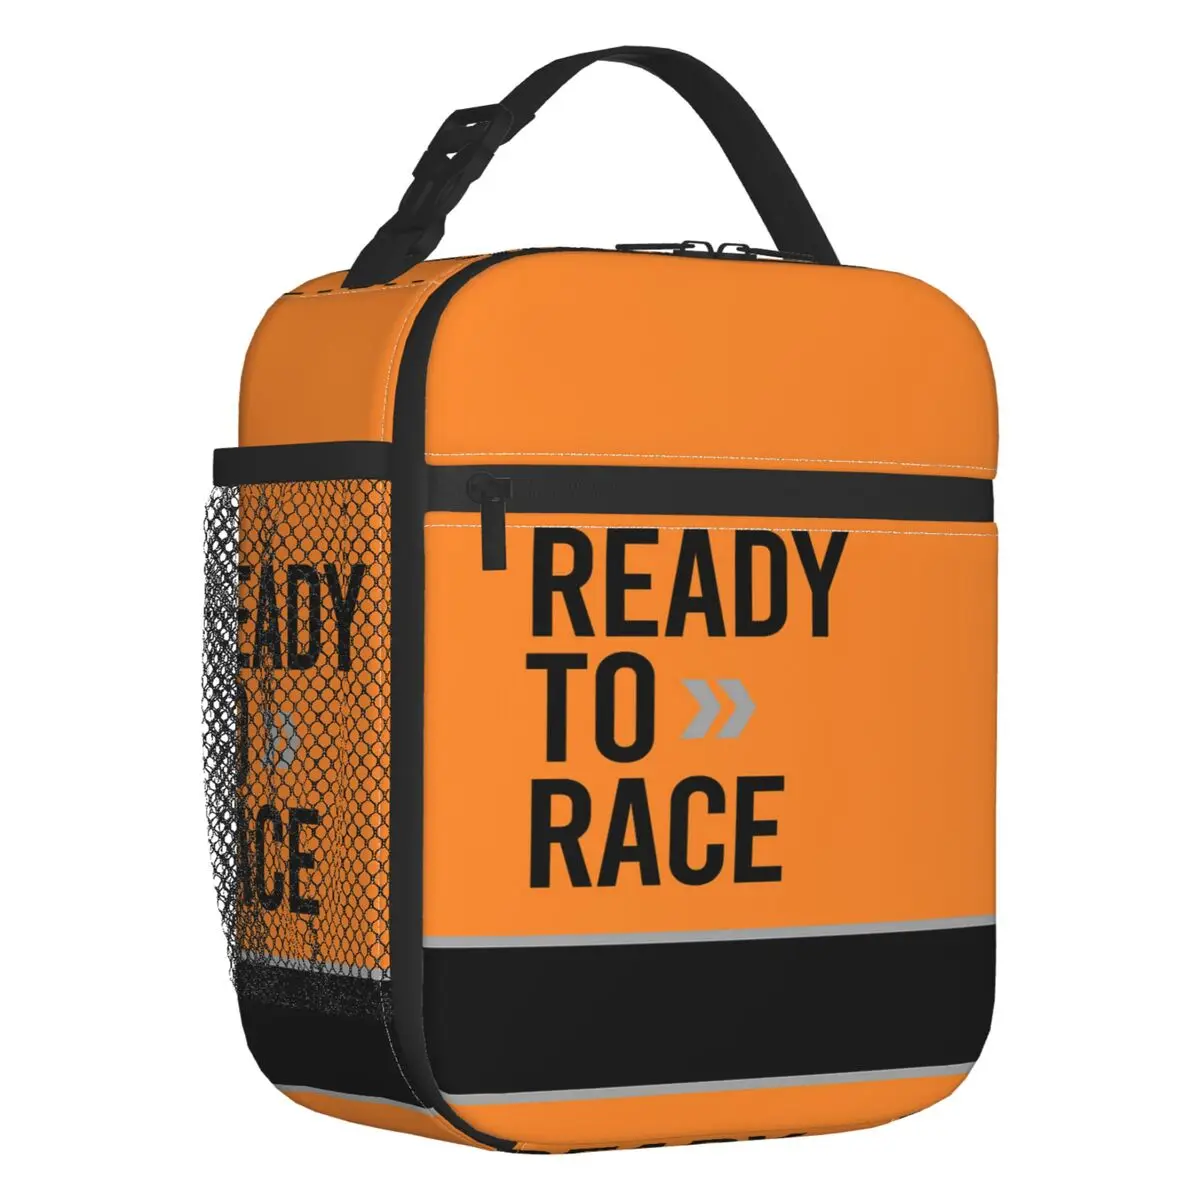 

Ready To Race Insulated Lunch Tote Bag Enduro Cross Motocross Bitumen Bike Life Resuable Cooler Thermal Bento Box School Travel